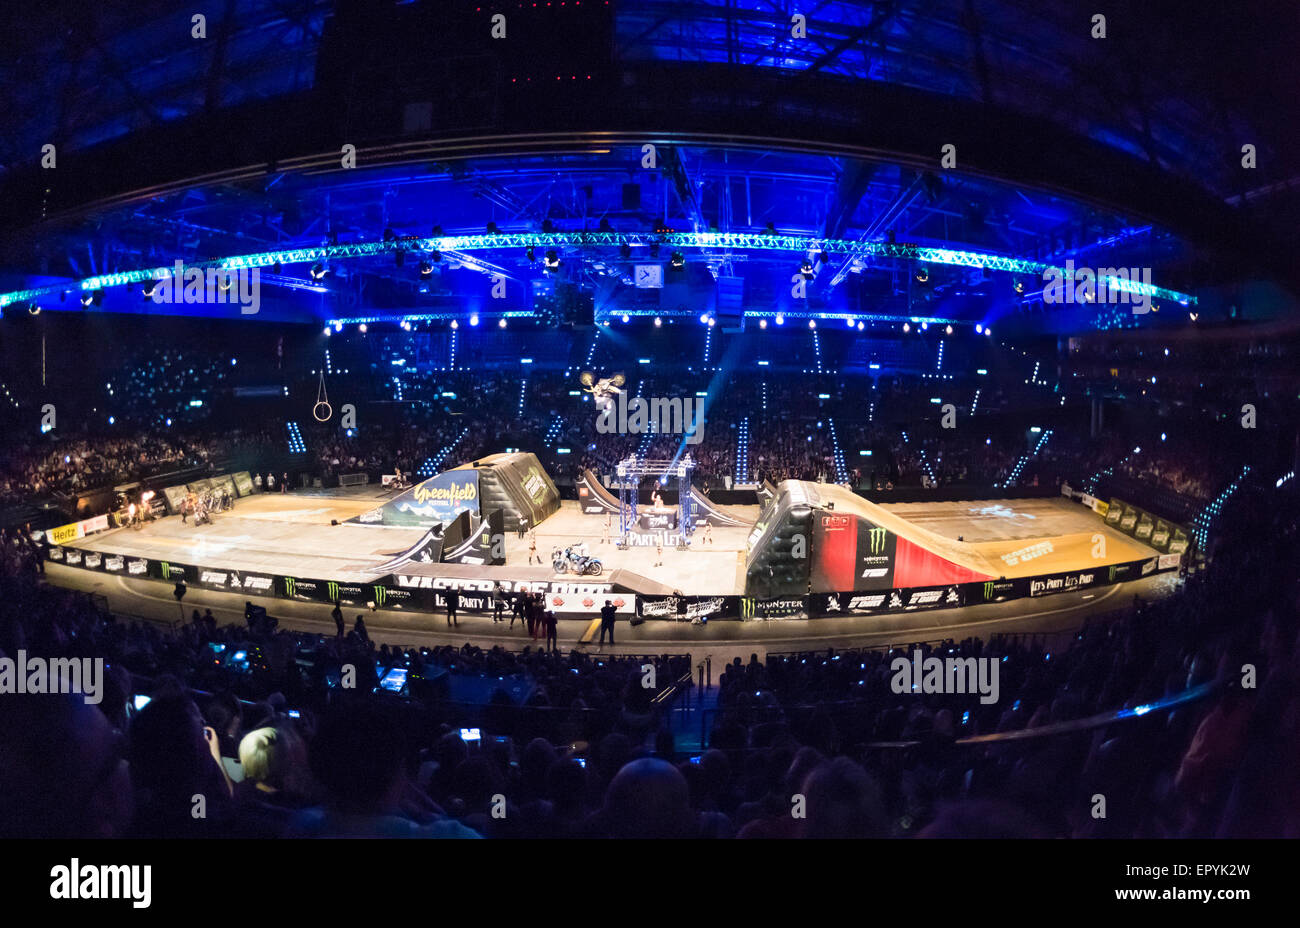 Zurich, Switzerland. 22nd May, 2015. Zurich Hallenstadion, packed with ramps and tracks for the 'Masters of Dirt' freestyle motocross show. Credit:  Erik Tham/Alamy Live News Stock Photo